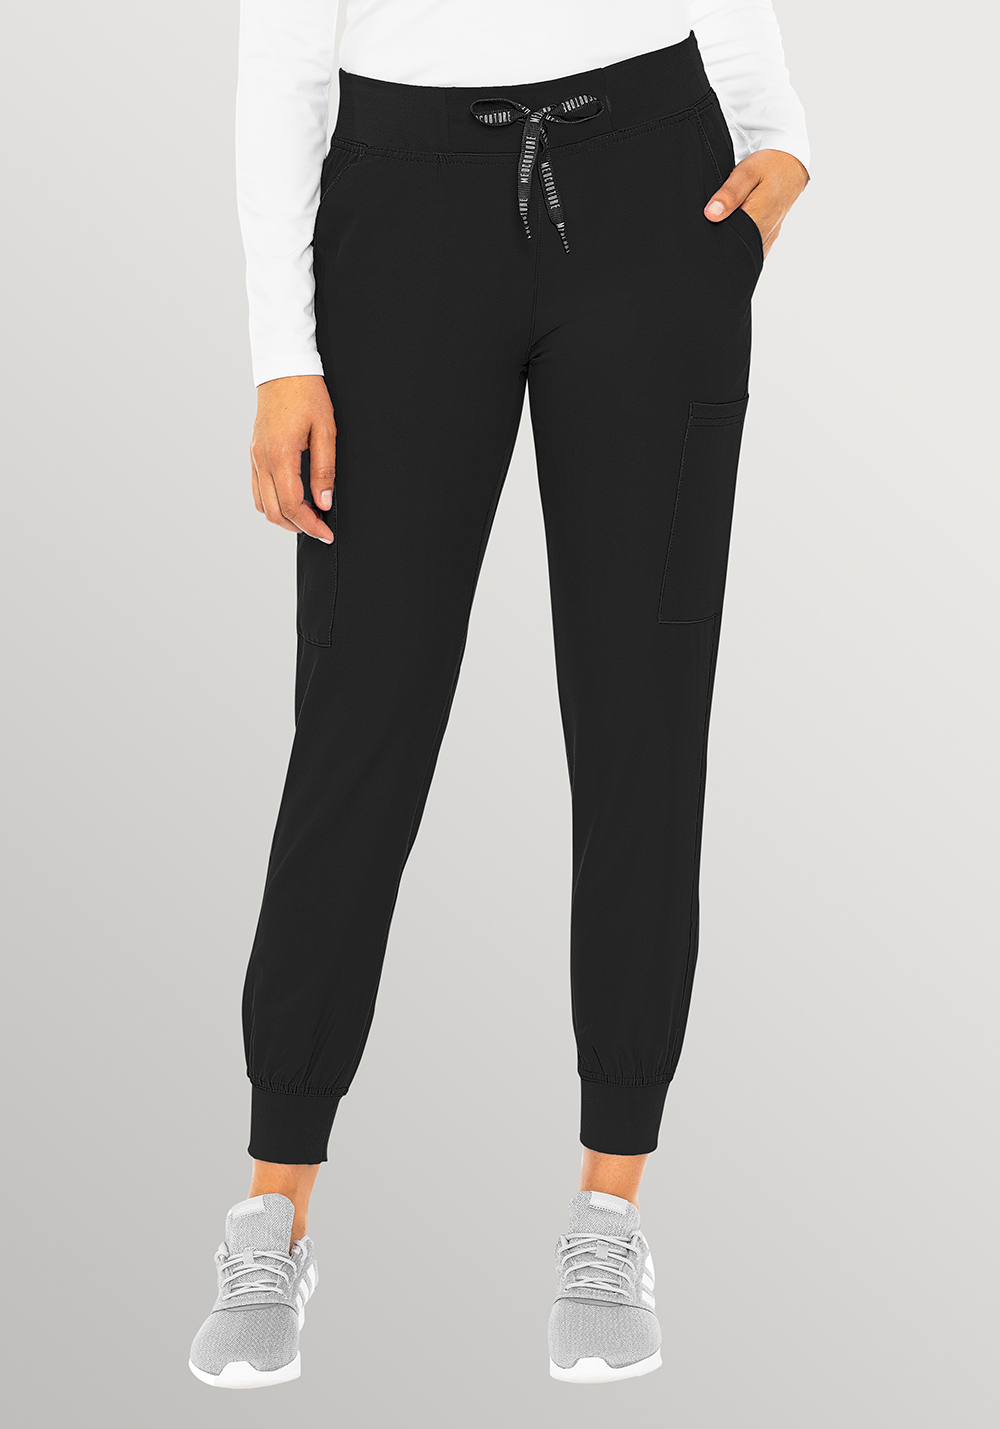 Womens Med Couture Insight Jogger Pant Black